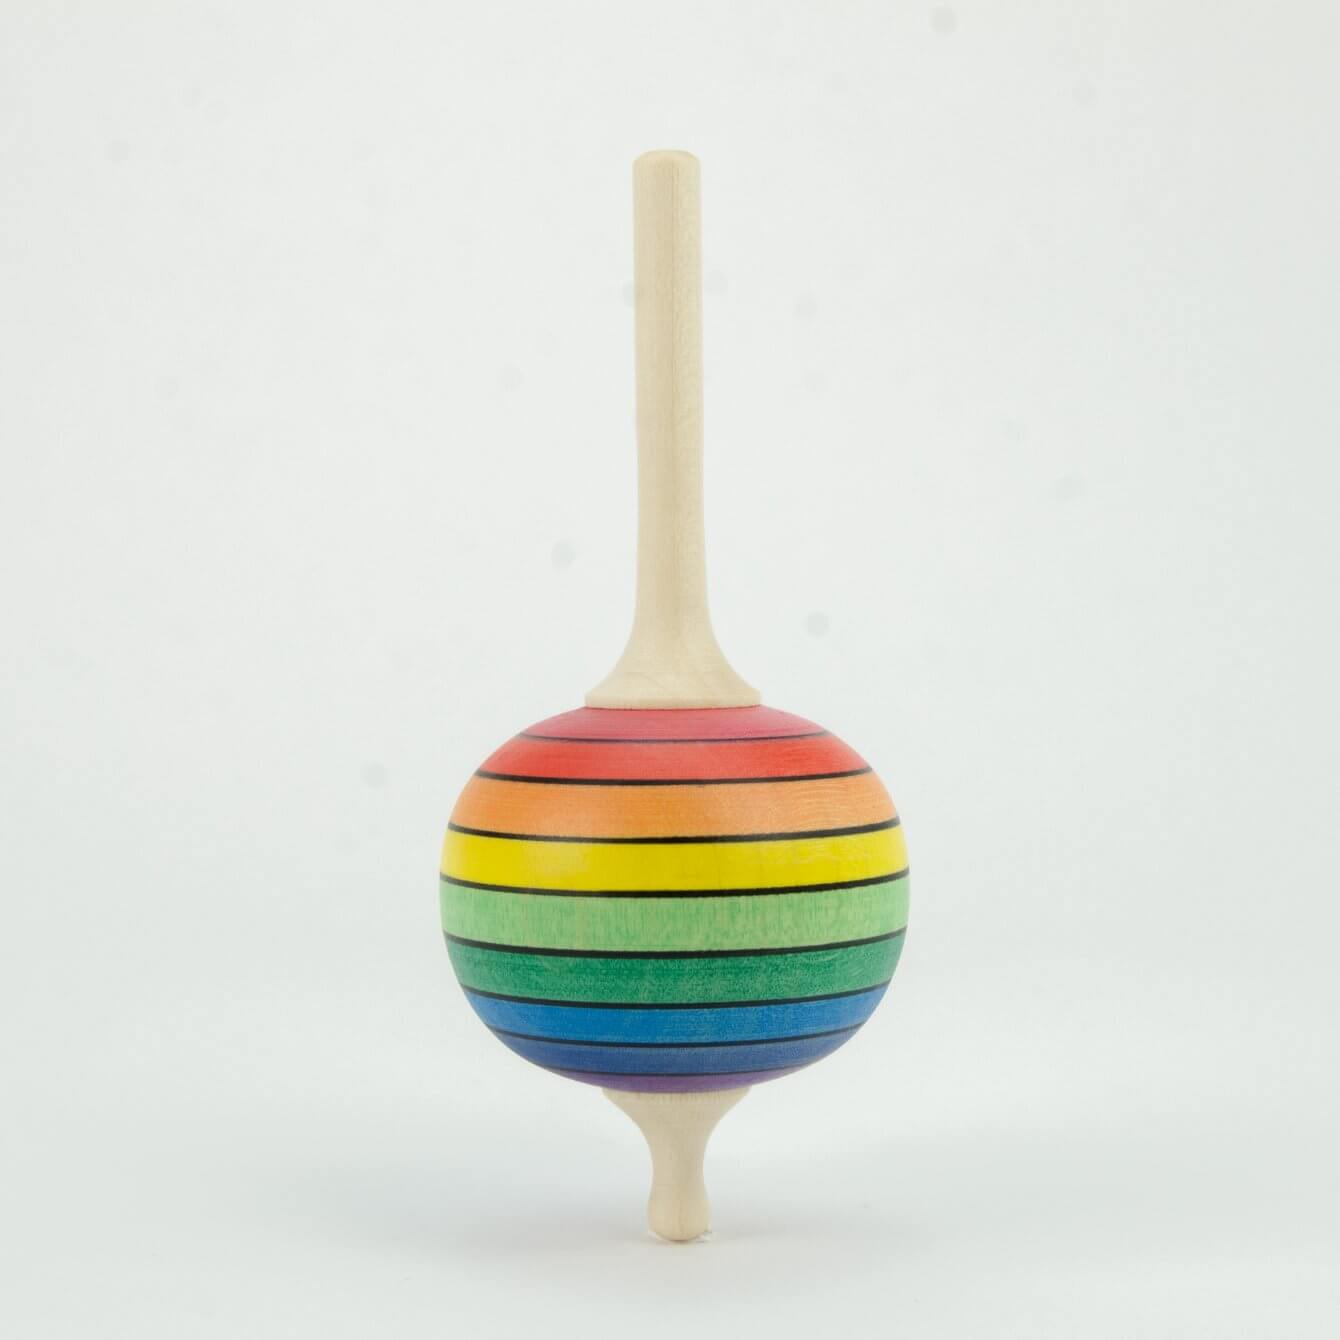 Lolly Spinning Top Rainbow